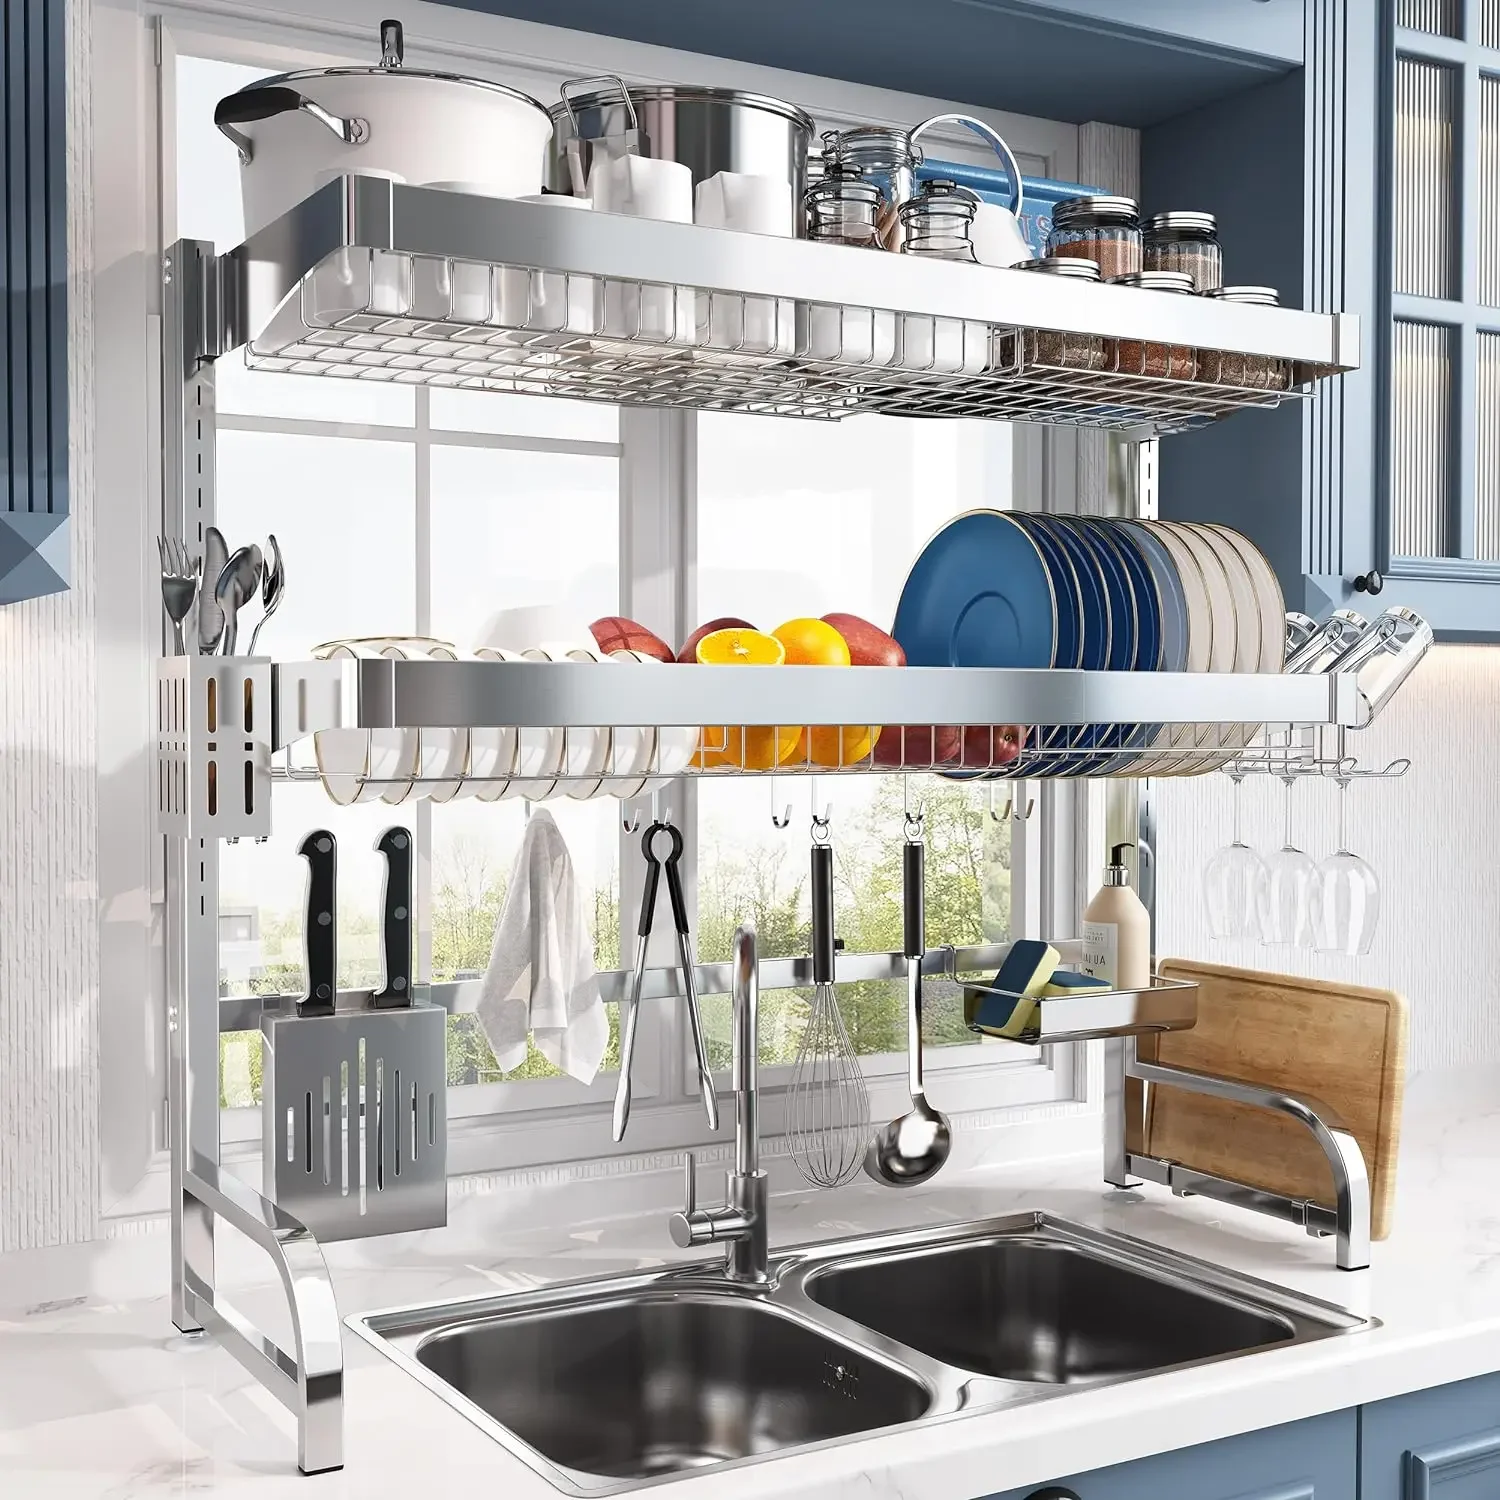 https://ae01.alicdn.com/kf/Sa80f7fc363ab48b98bc027139bd65dccP/Over-Sink-Dish-Drying-Rack-3-Tier-Full-304-Stainless-Steel-Large-Dish-Drainer-for-Kitchen.jpg